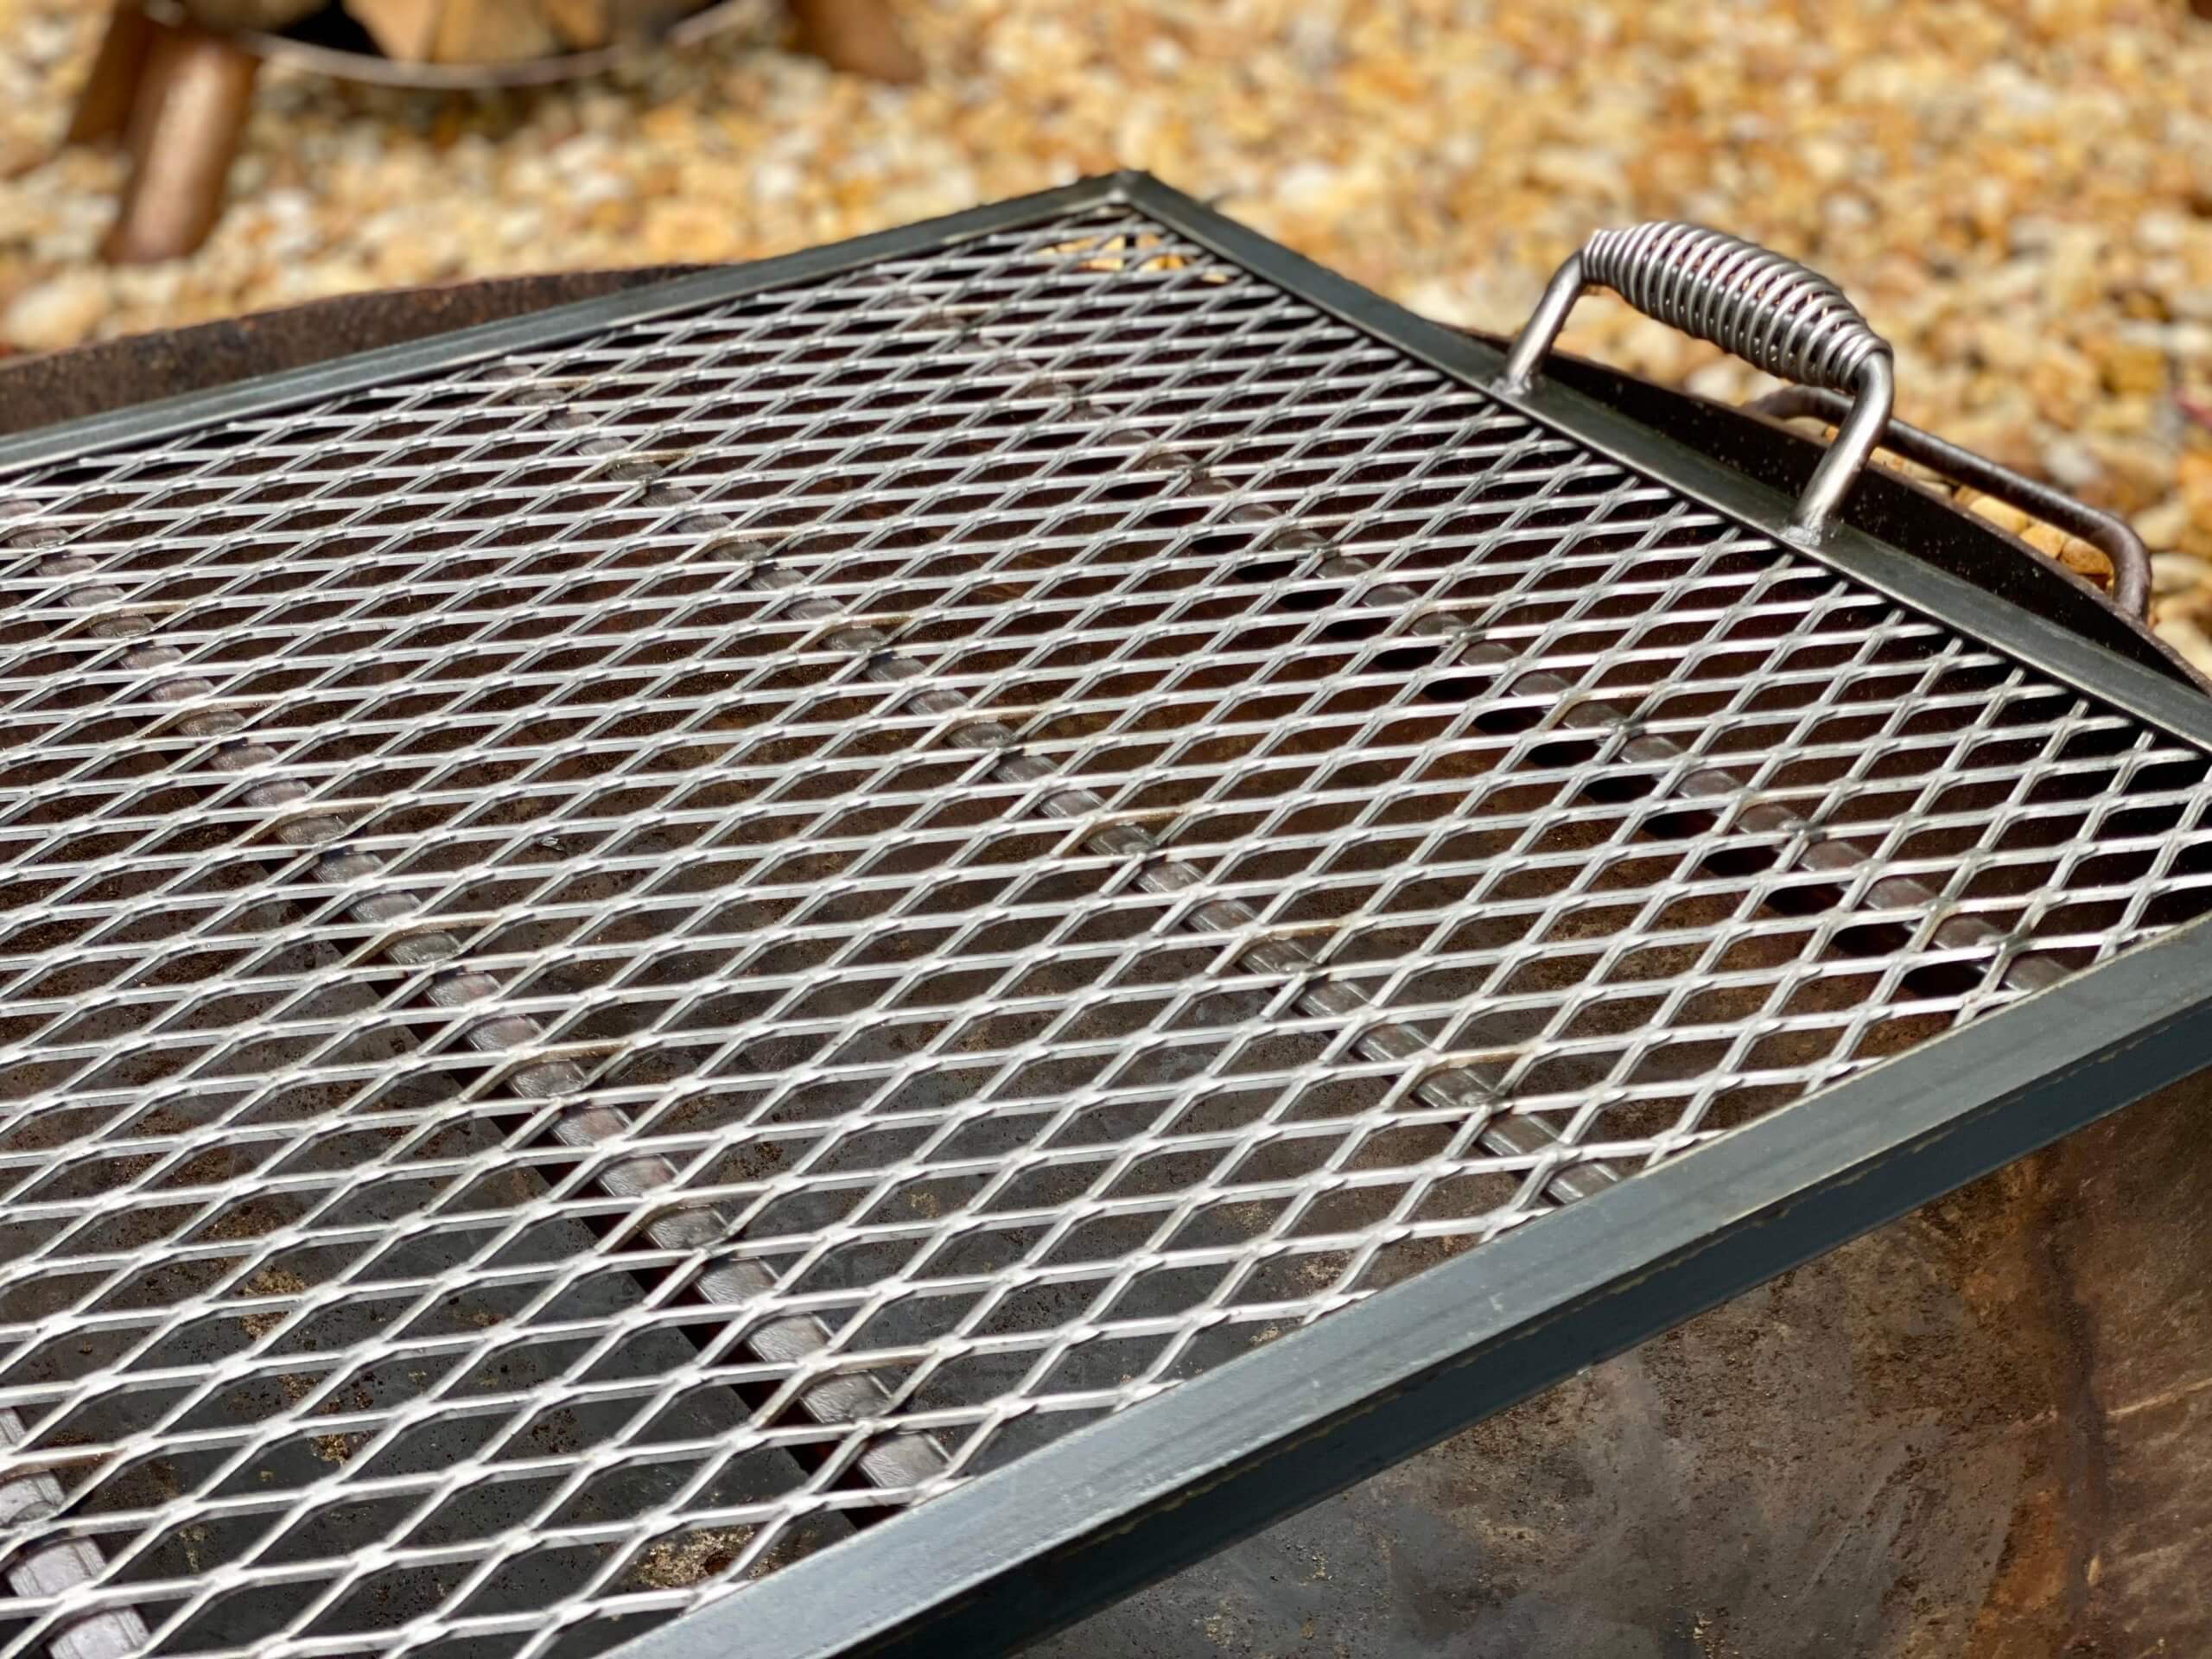 42 Heavy Duty Handcrafted Fire Pit, How To Use Fire Pit Grate